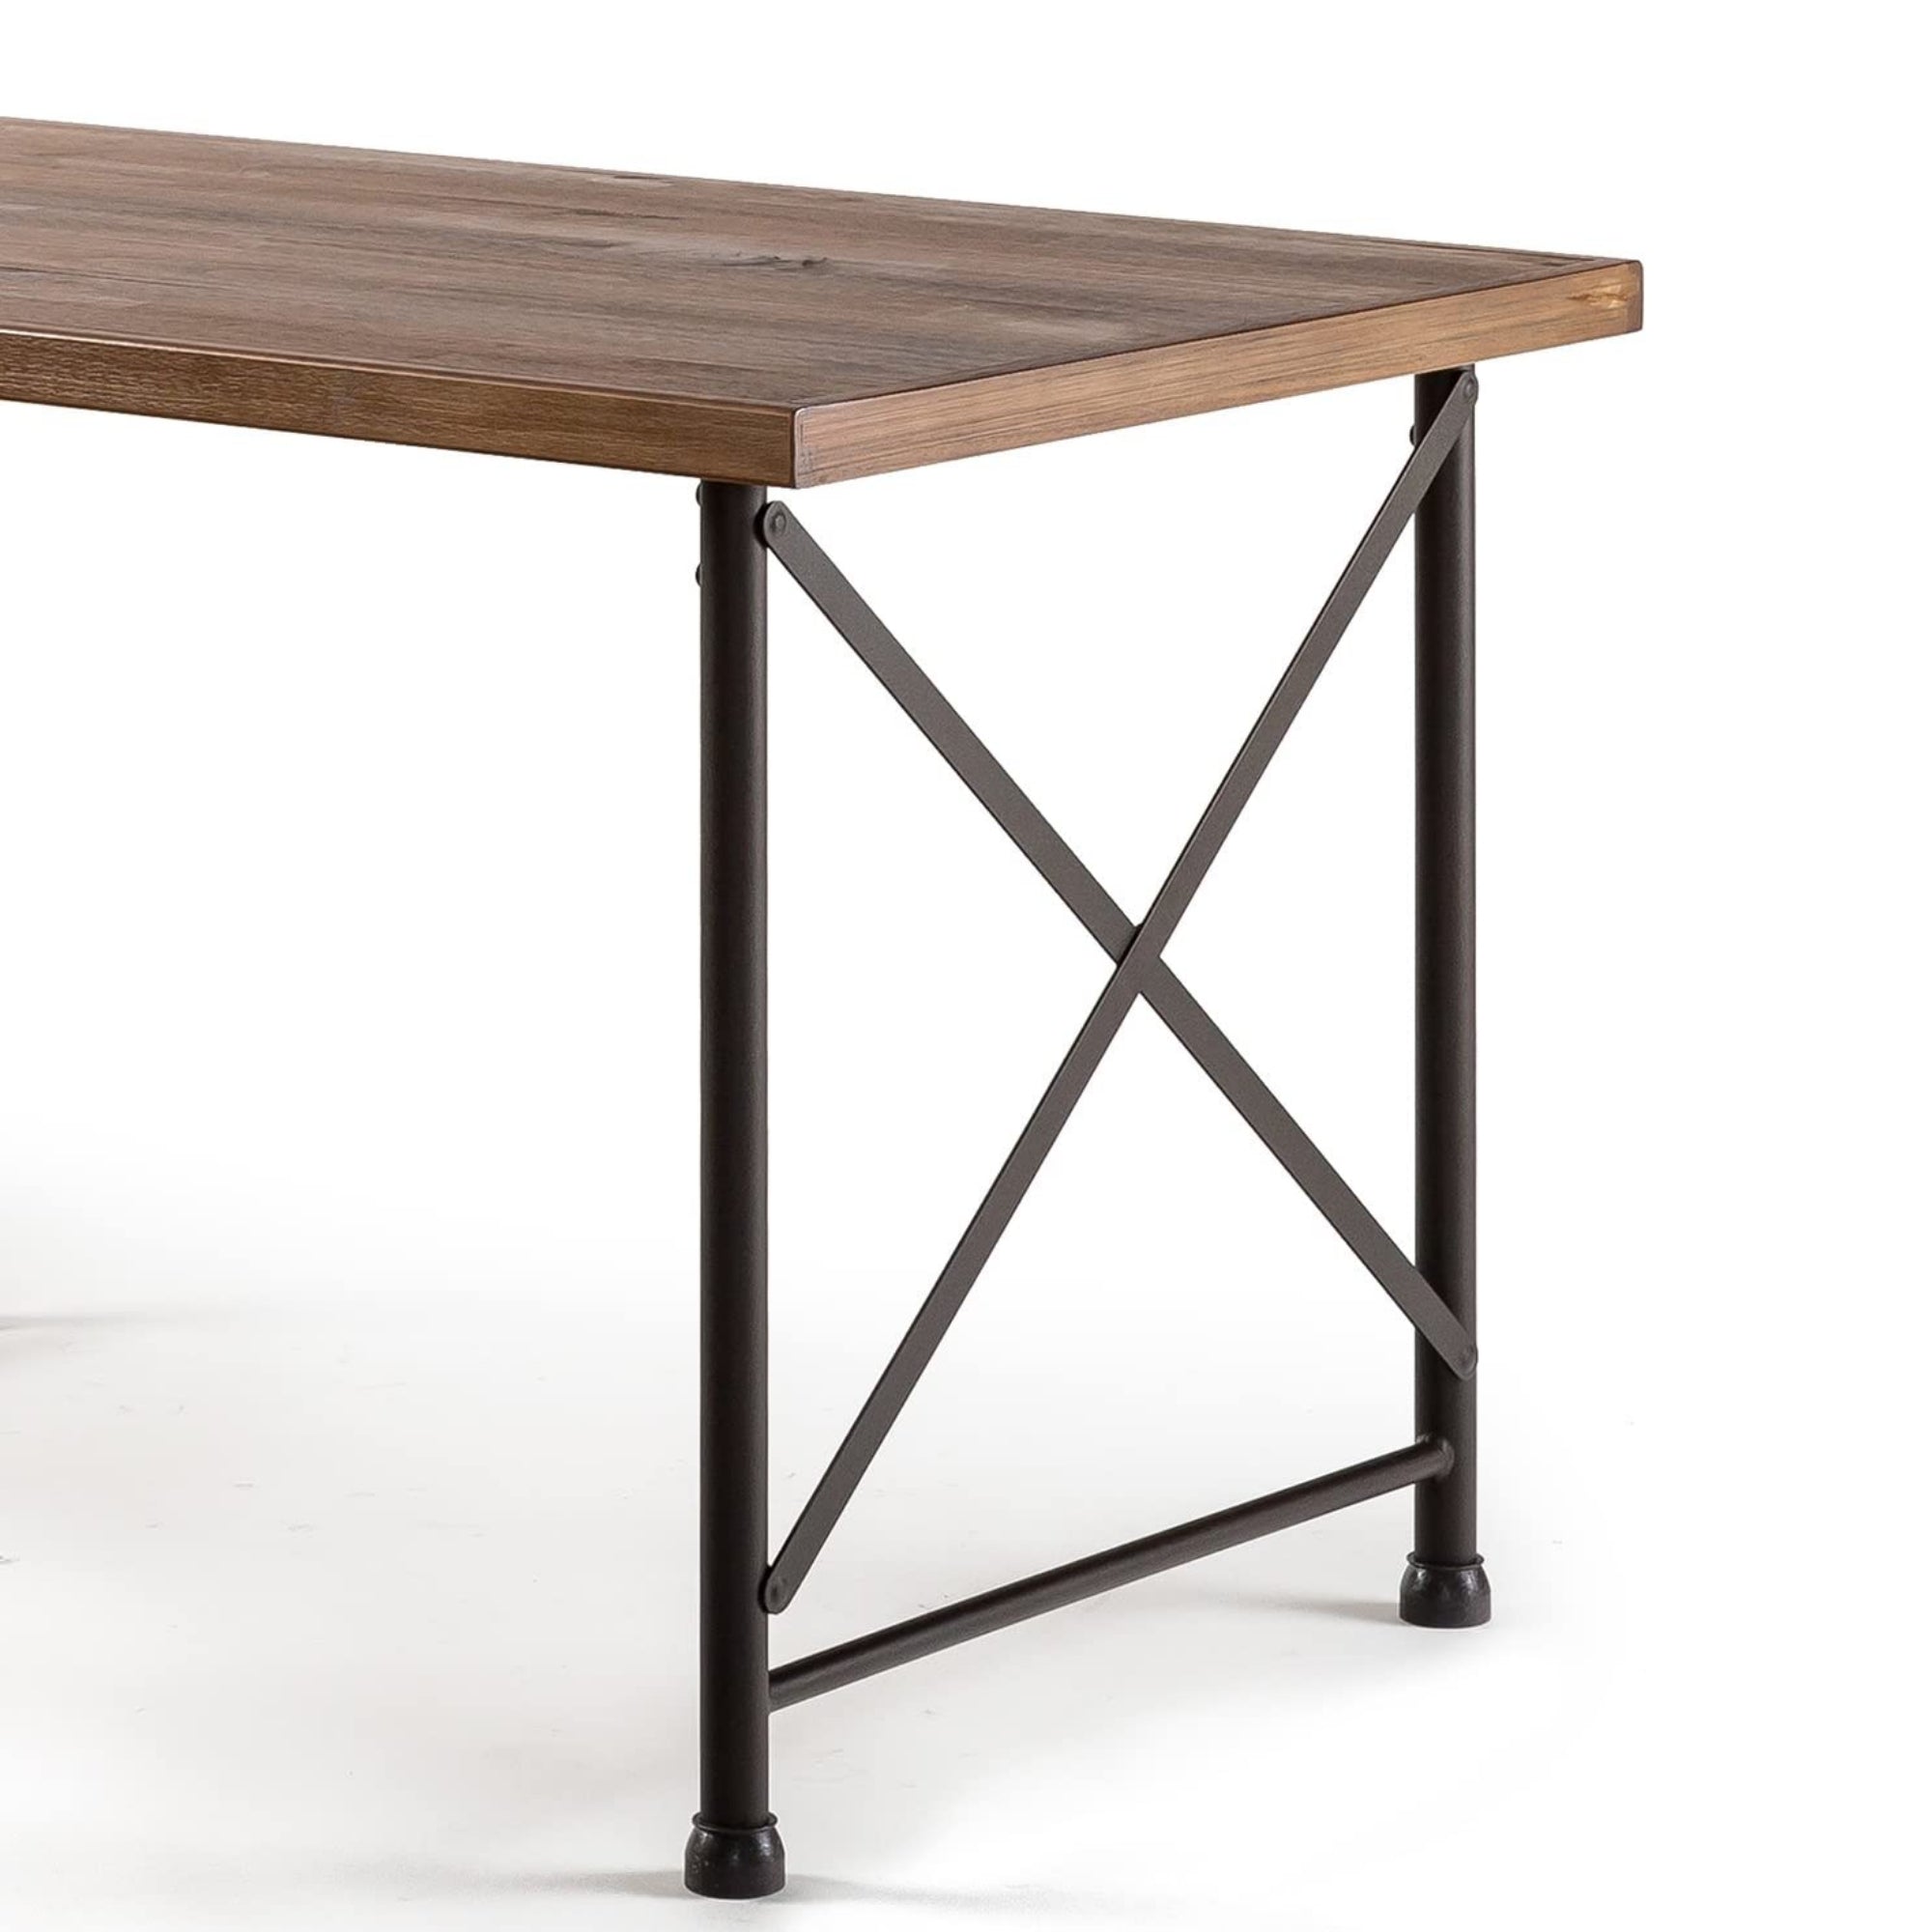 Alicia Metal and Wood Dining Table